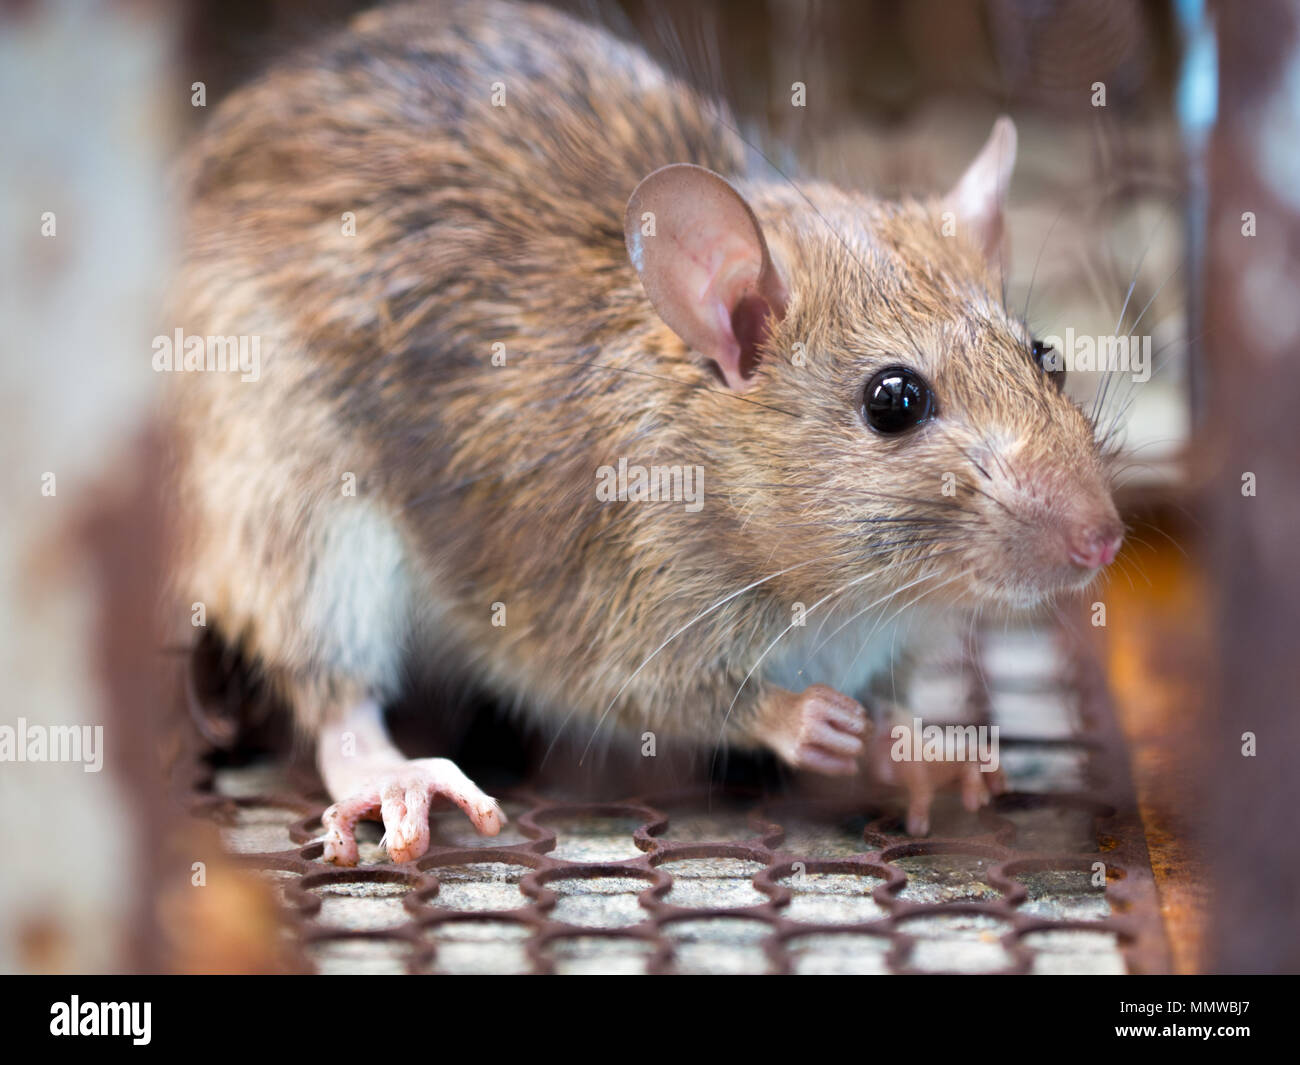 Rat is trapped in a trap cage or trap. the dirty rat has contagion the disease to humans such as Leptospirosis, Plague. Homes and dwellings should not Stock Photo